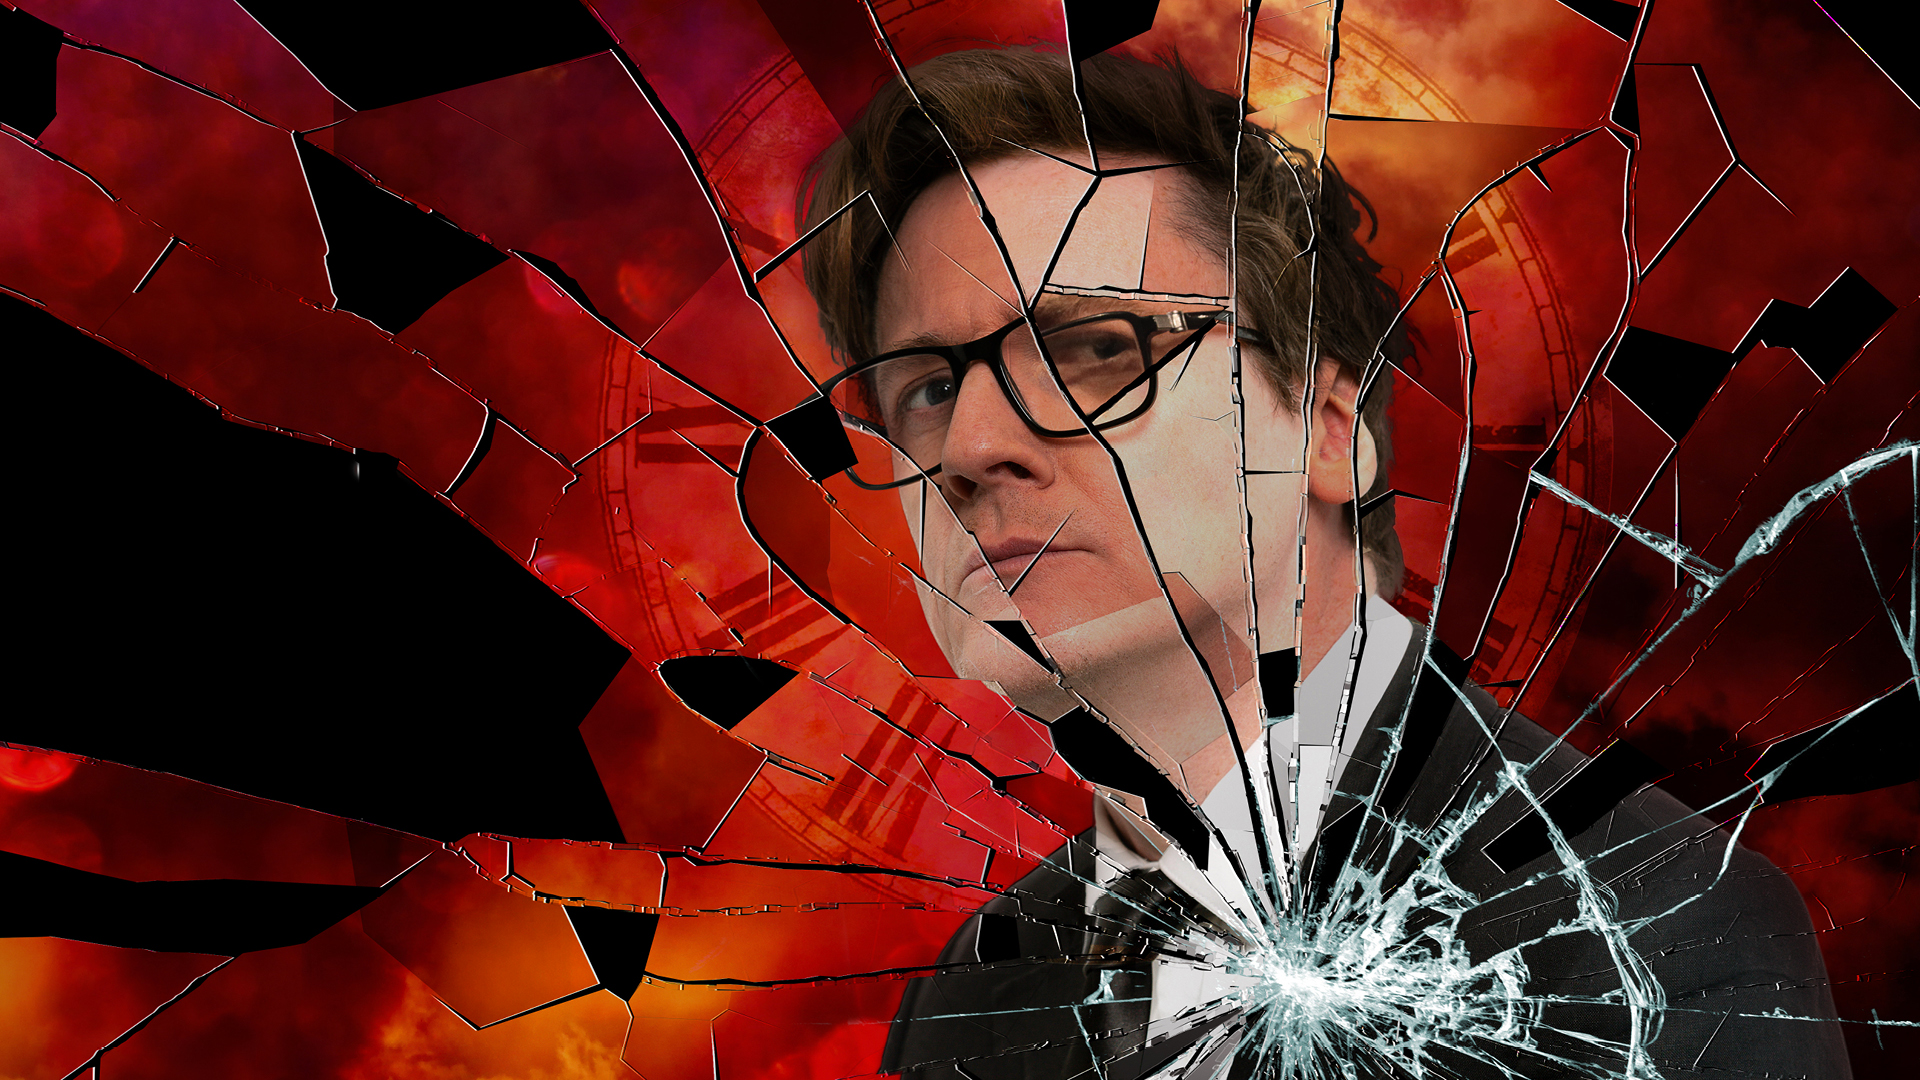 A man wearing a suit and glasses - the image looks like glass that has been shattered